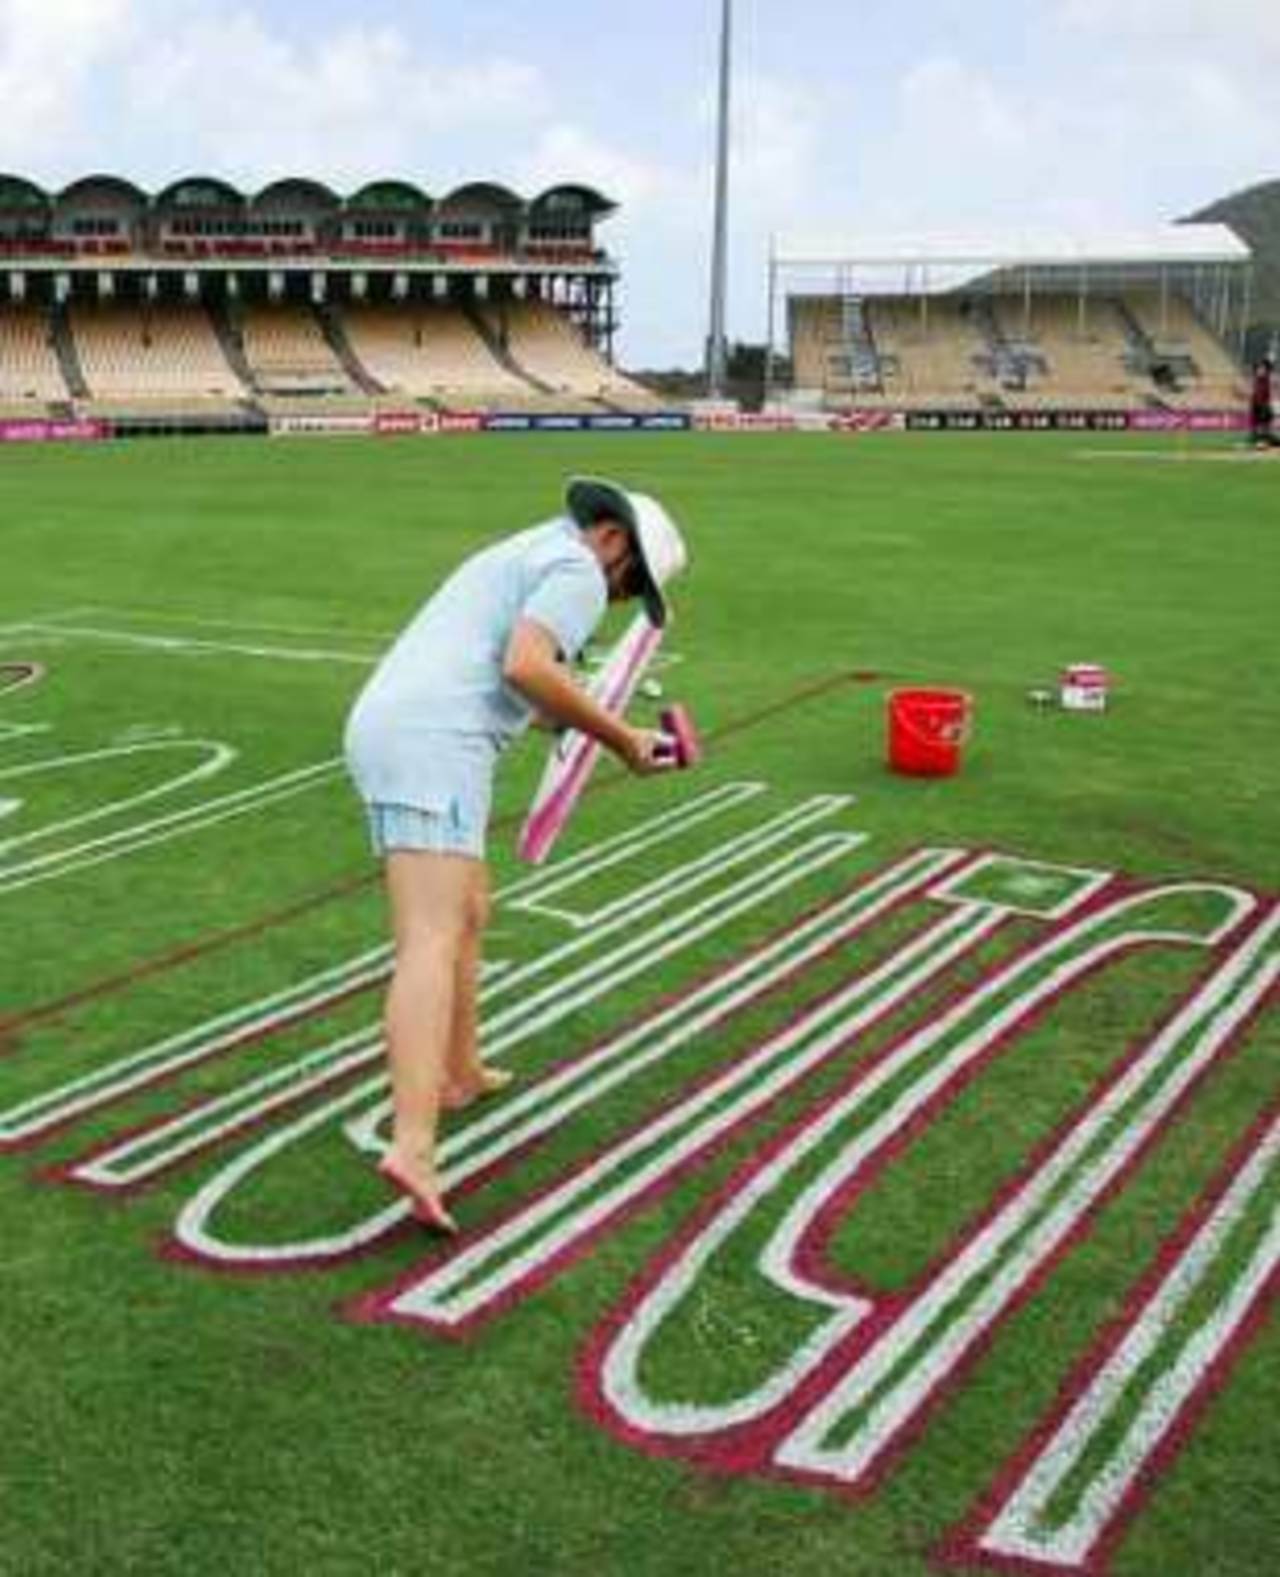 The sponsors are painted onto the outfield as the final touches are put together before the World Cup, 2007 World Cup, St Lucia, March 12, 2007